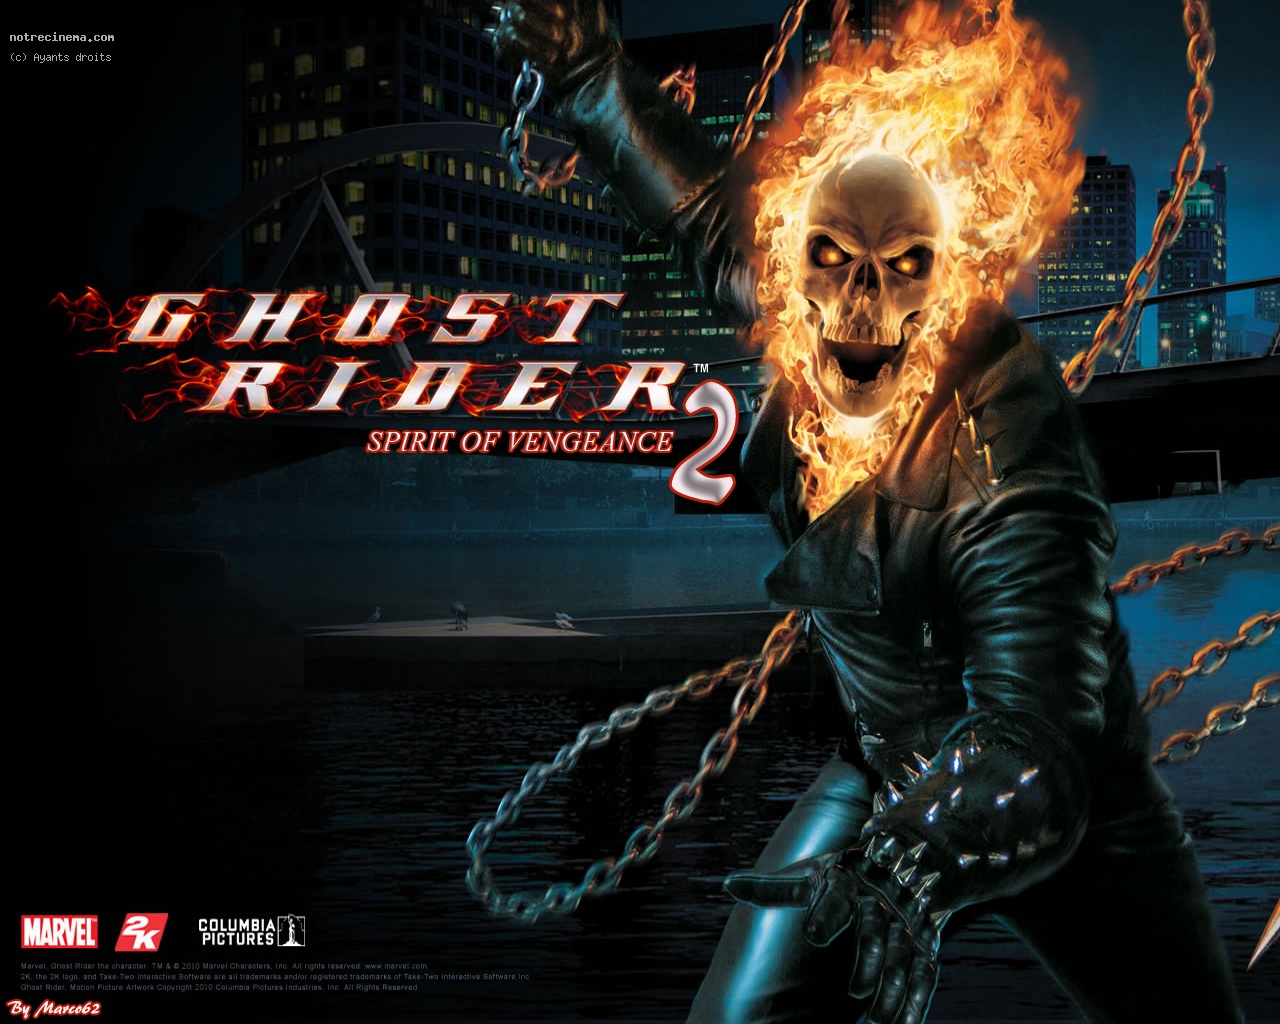 JKs Wing Ghost Rider 2 Movie Review